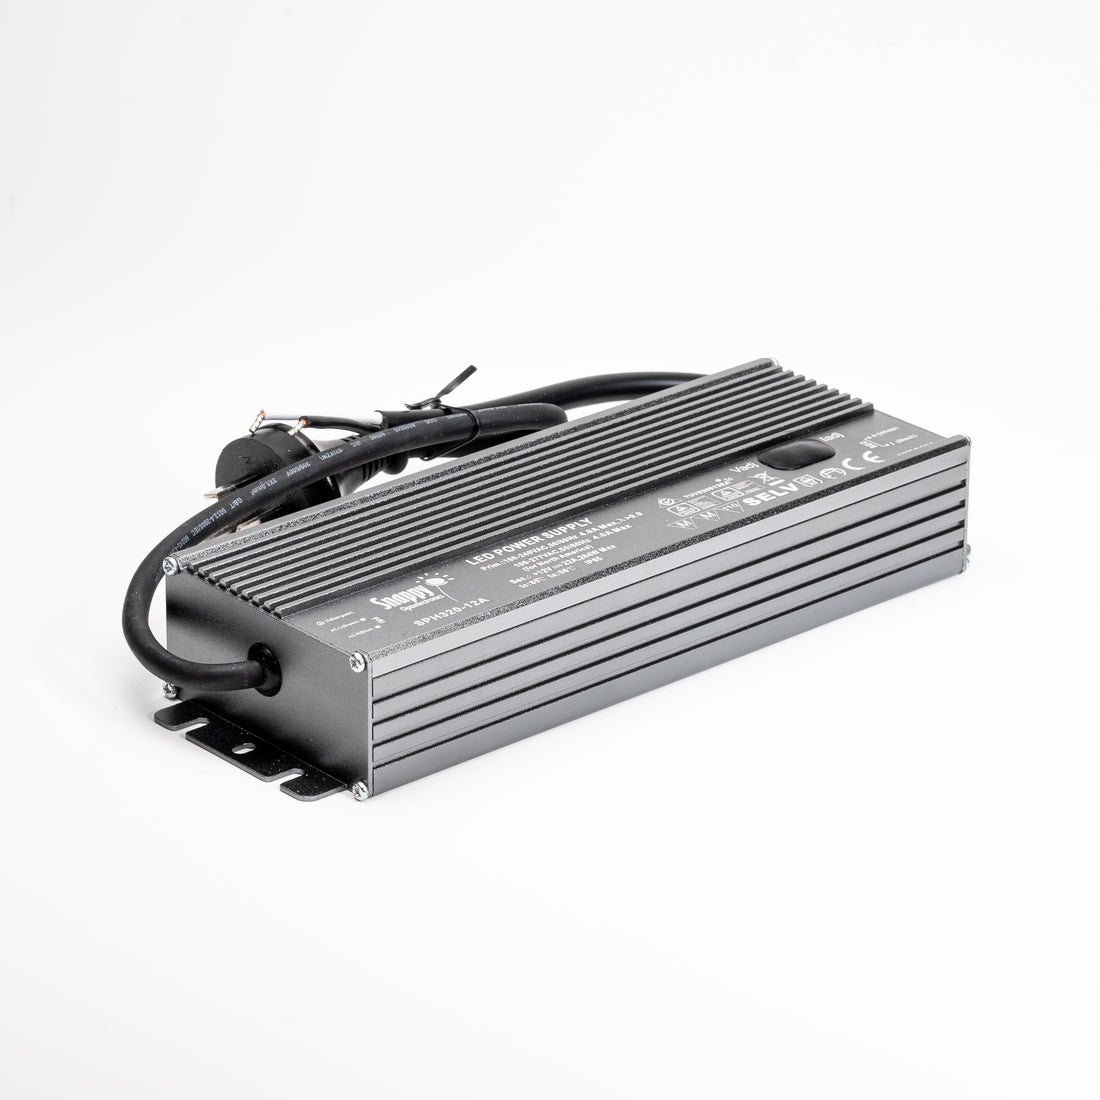 12V 300W IP65 Rated Weatherproof LED Power Supply / LED Driver